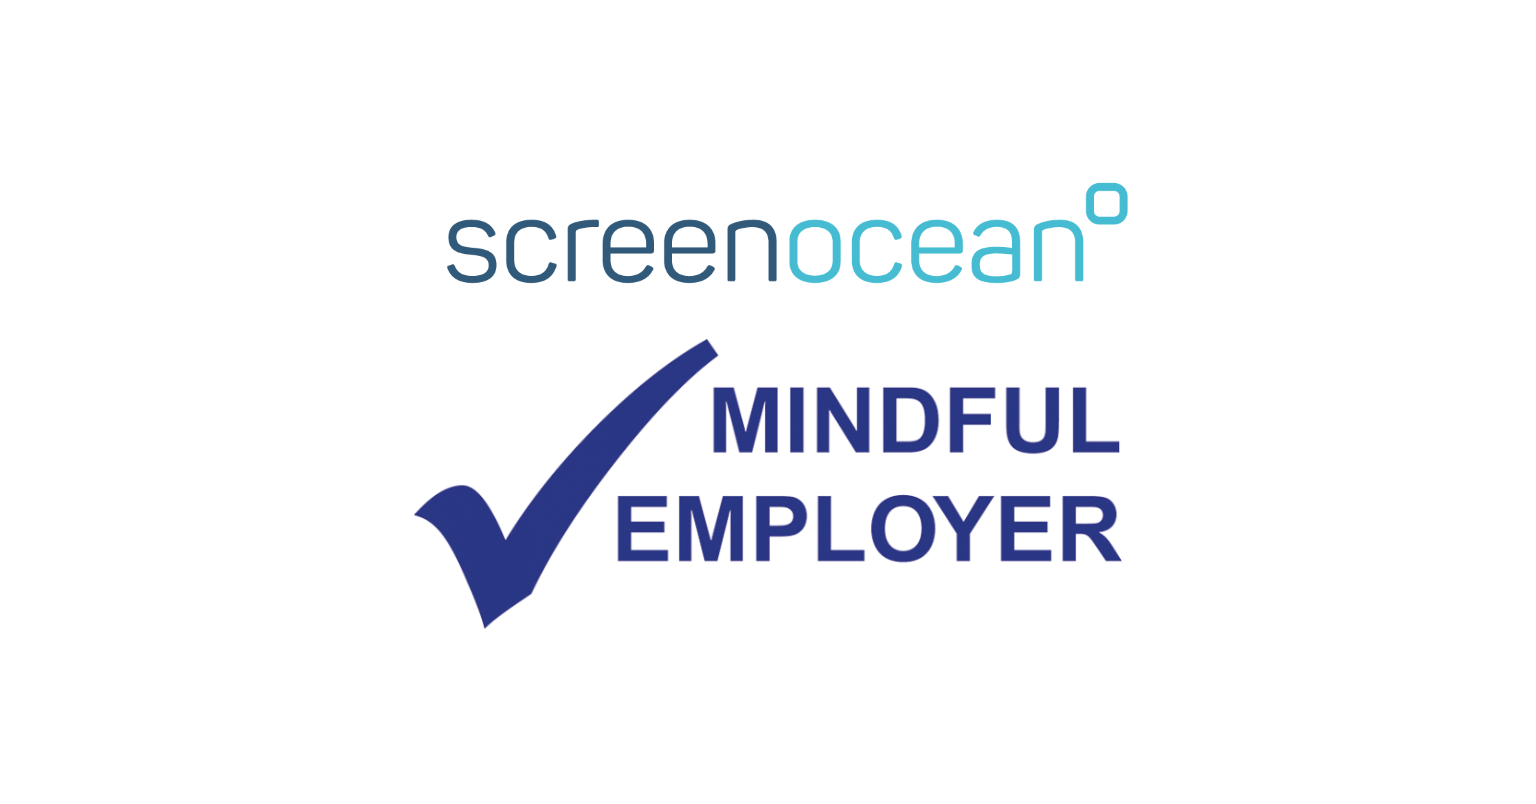 NEWS: SCREENOCEAN HAVE BECOME A MINDFUL EMPLOYER